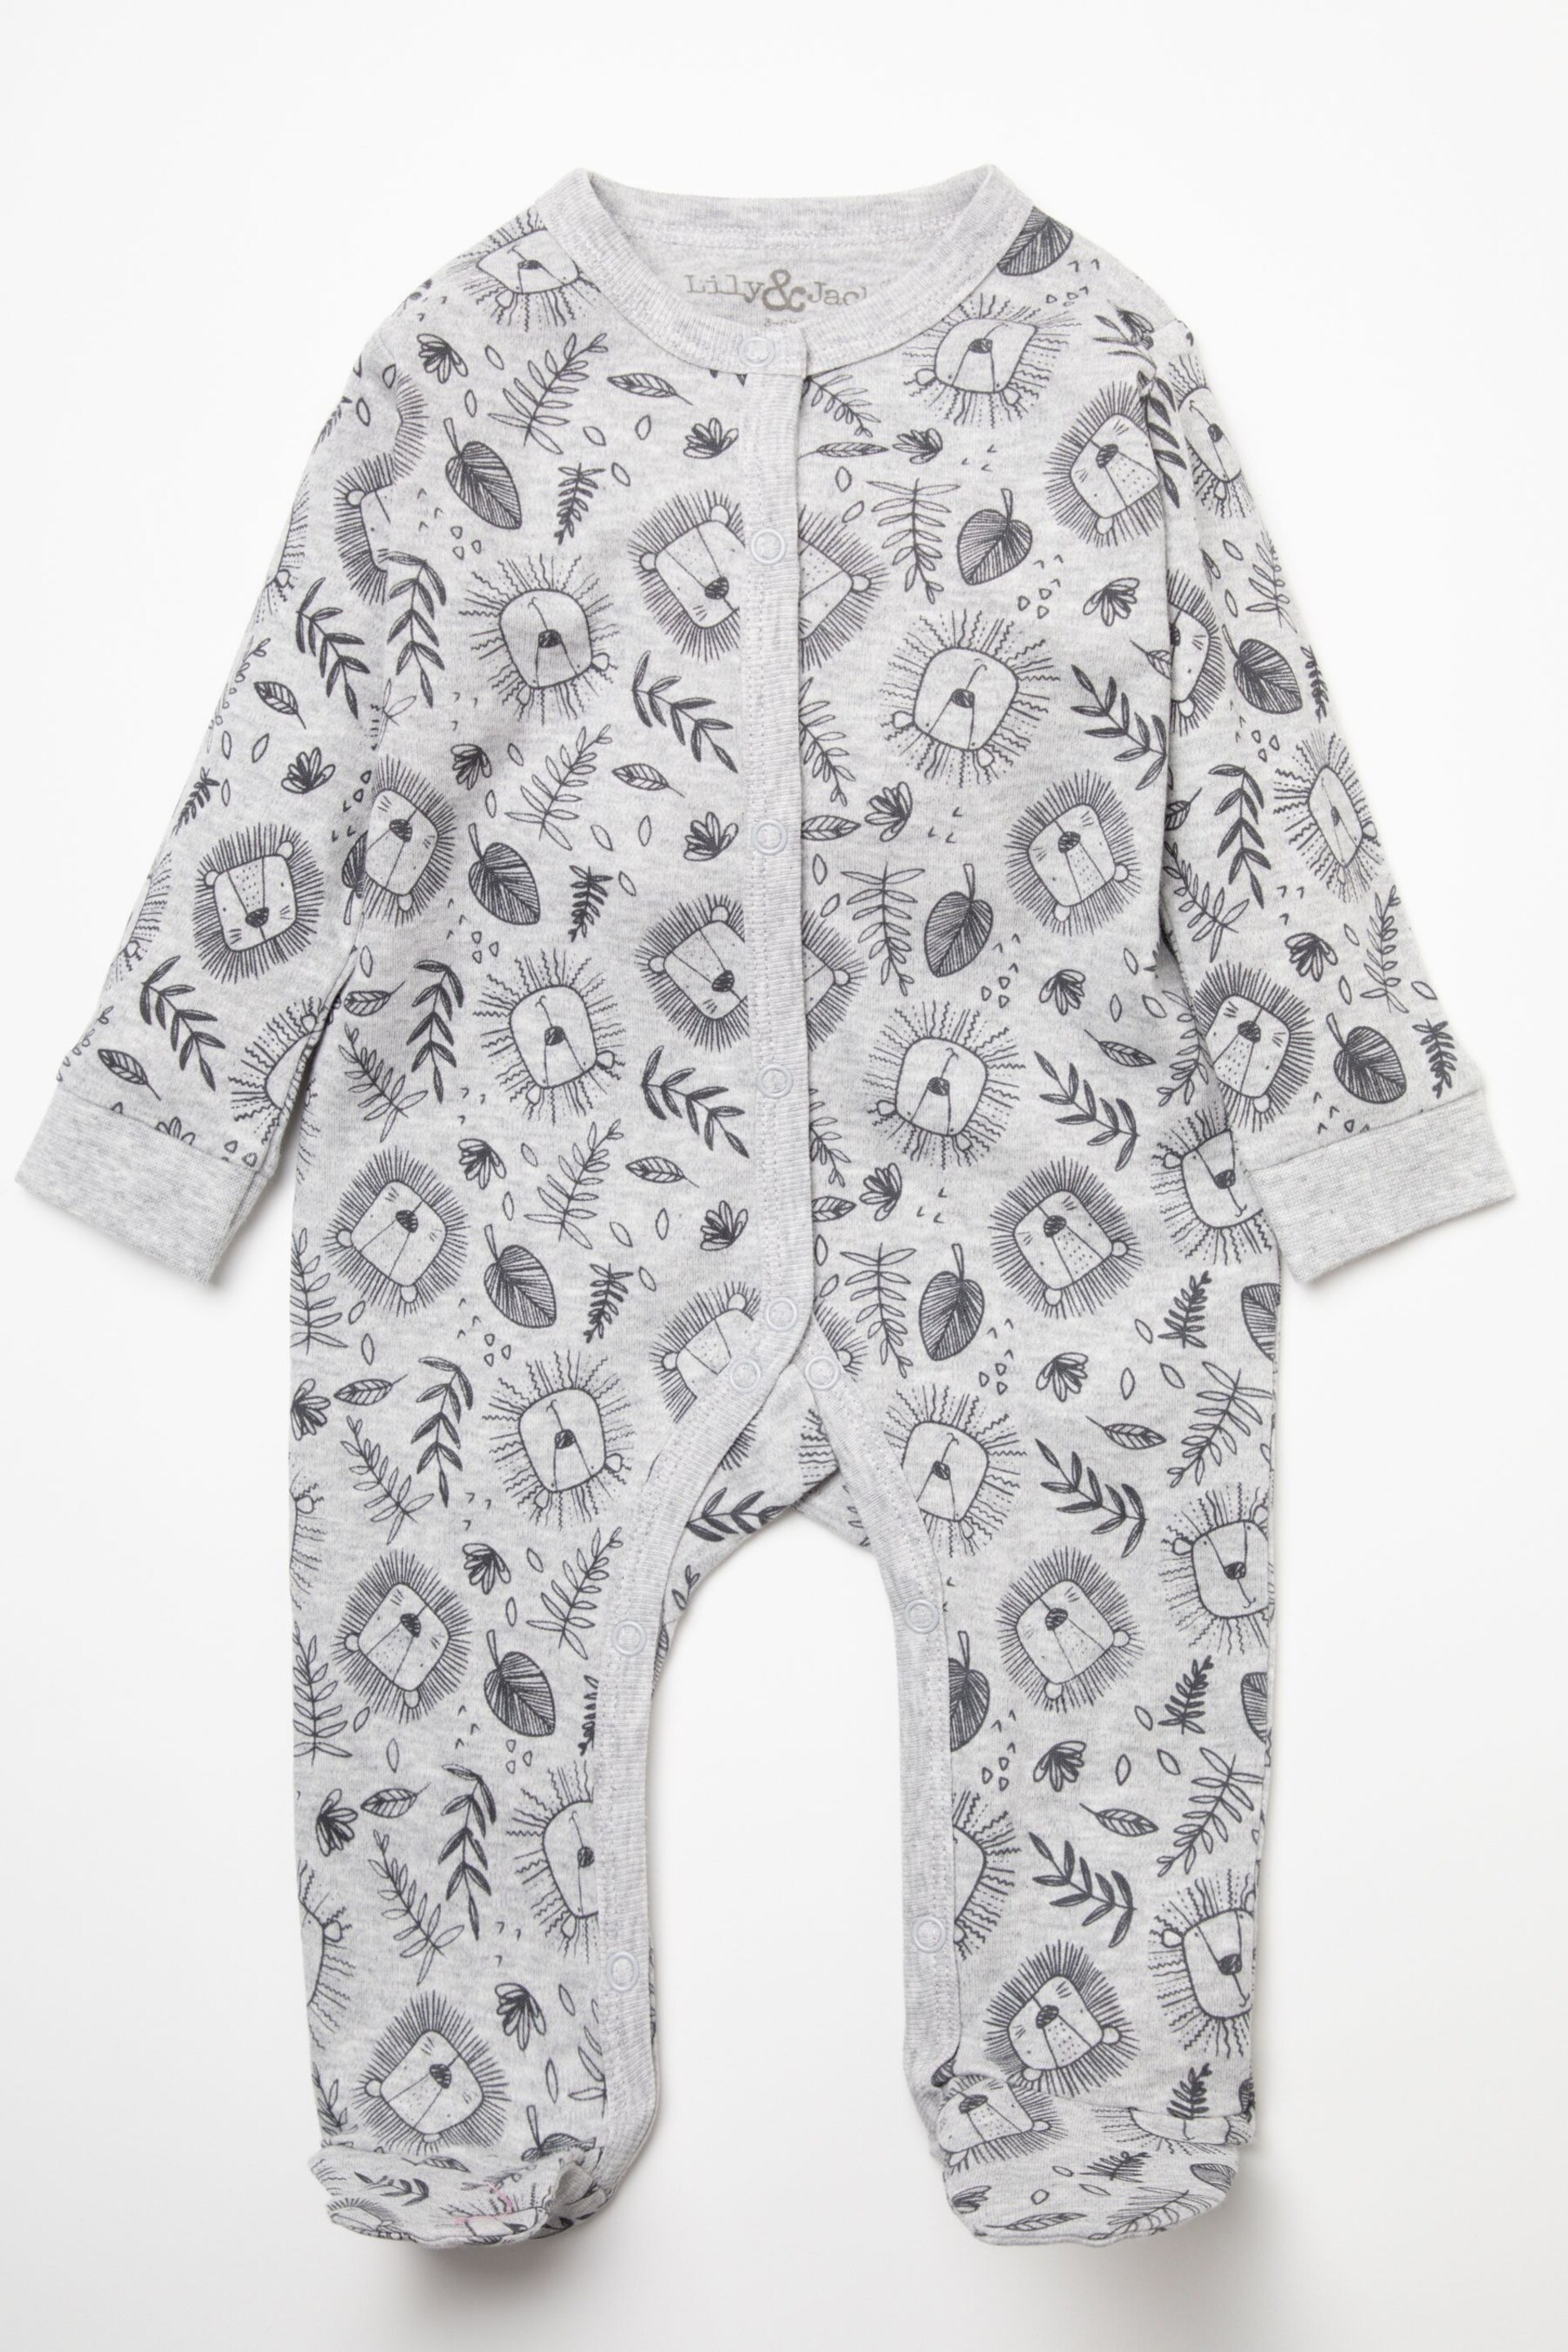 Little Gent Grey Lion Print Cotton 3-Piece Baby Gift Set - Image 2 of 5